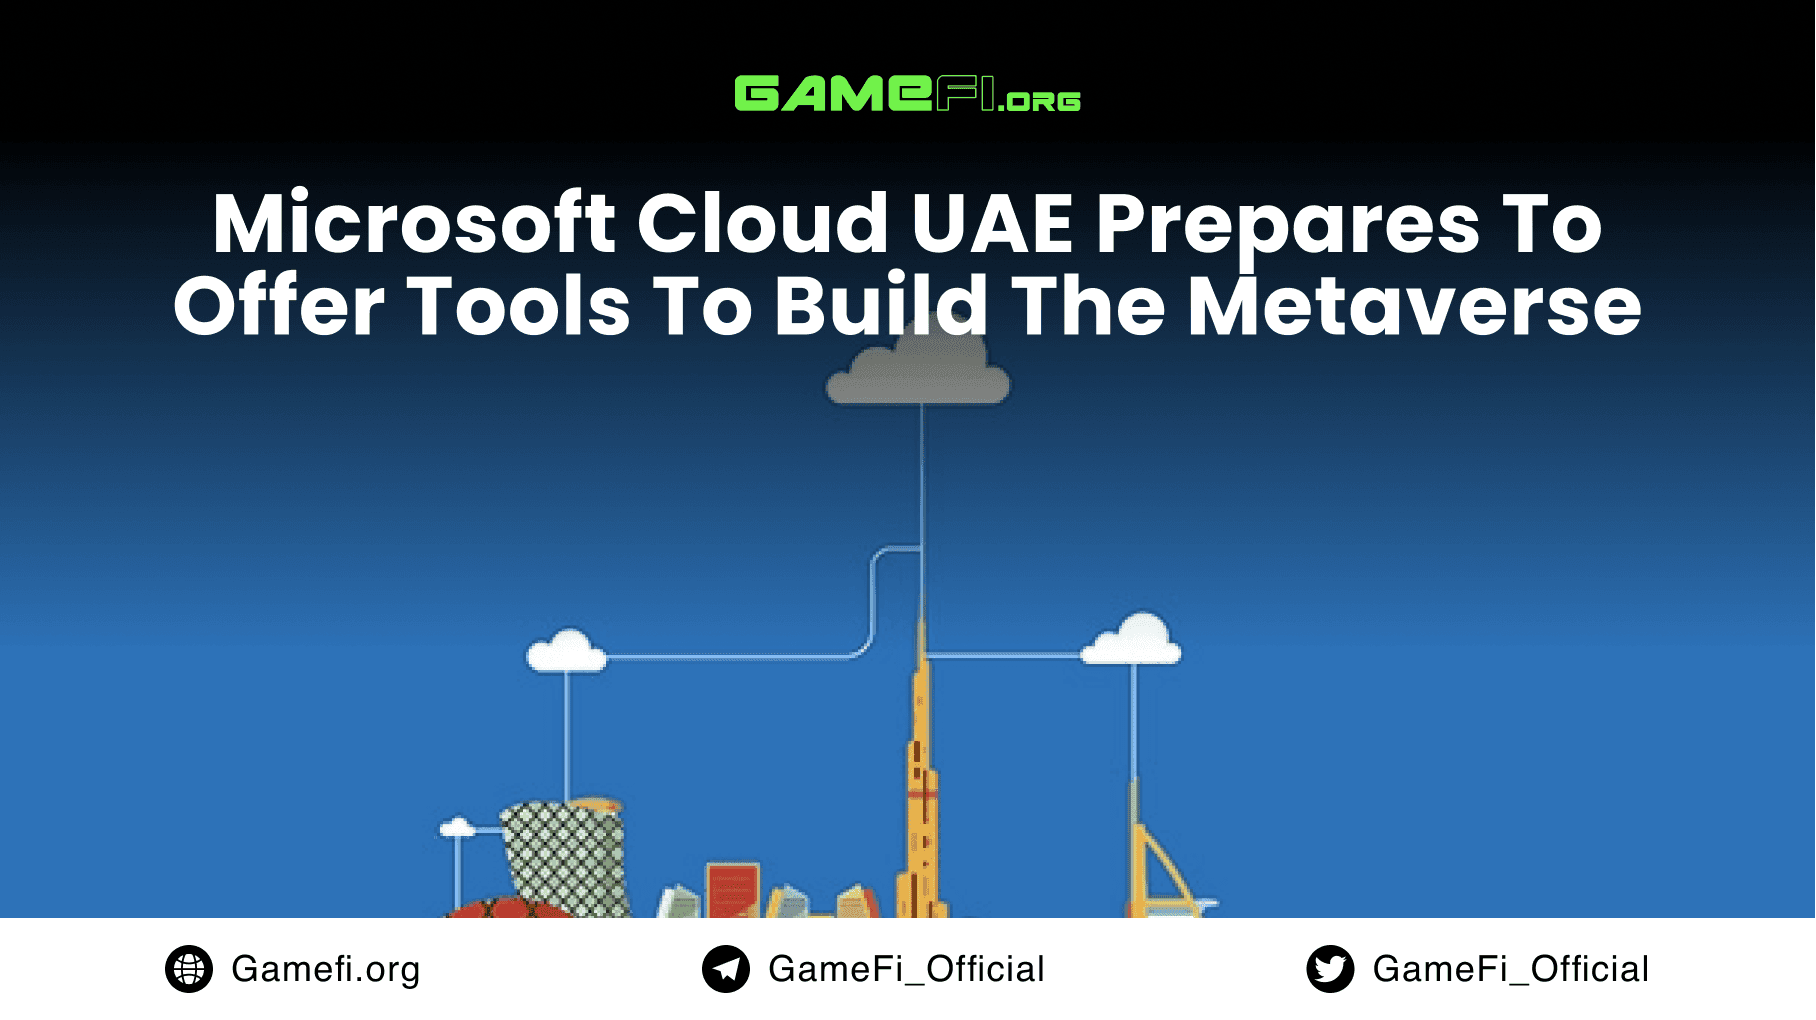 Microsoft Cloud UAE prepares to offer tools to build the Metaverse